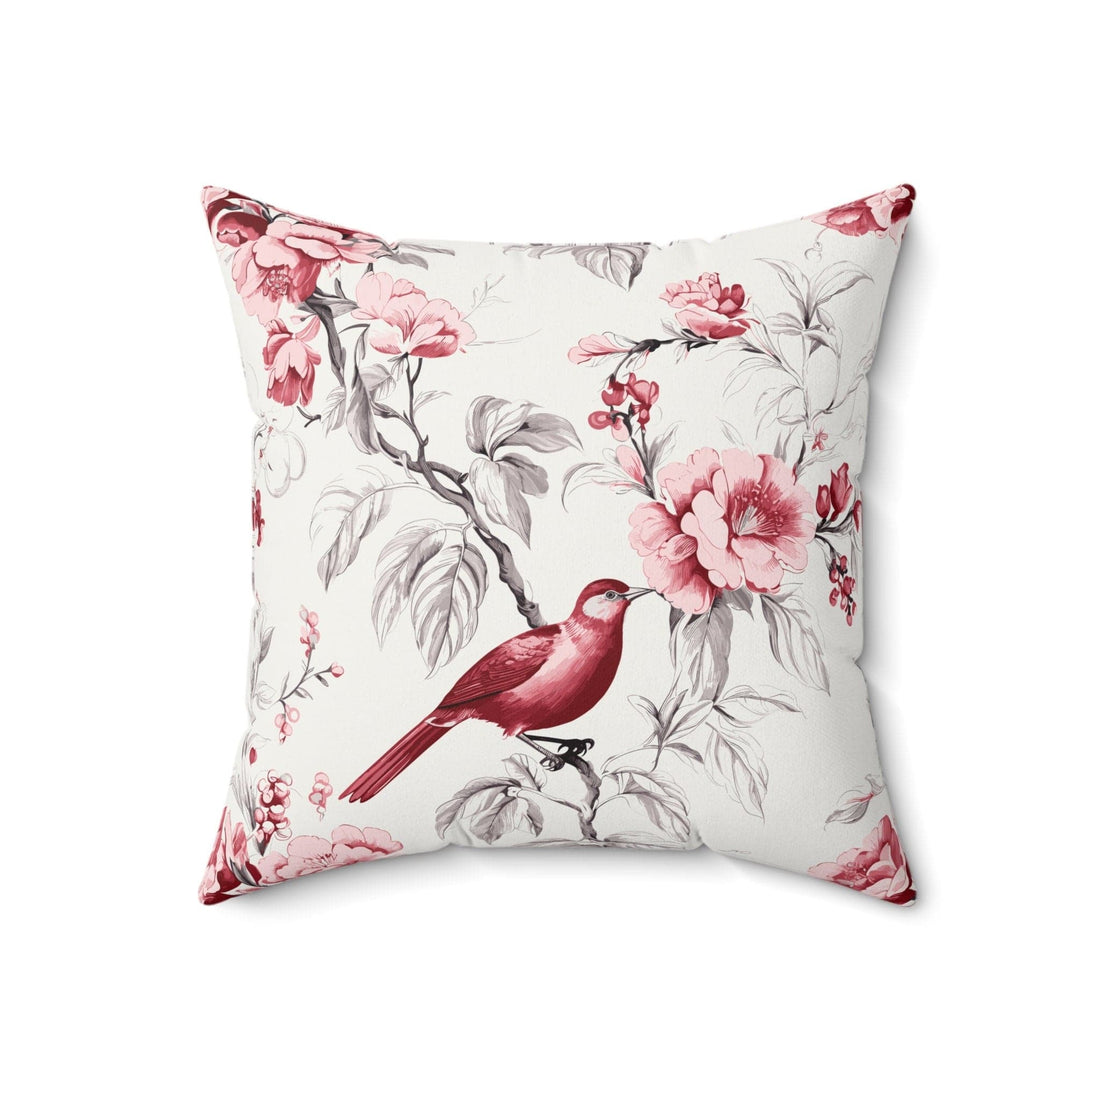 Kate McEnroe New York Chinoiserie Botanical Toile Floral Cranberry Red and White Throw Pillow, Country Farmhouse Living Room, Bedroom Decor - 132682823Throw Pillows21298929798385110964